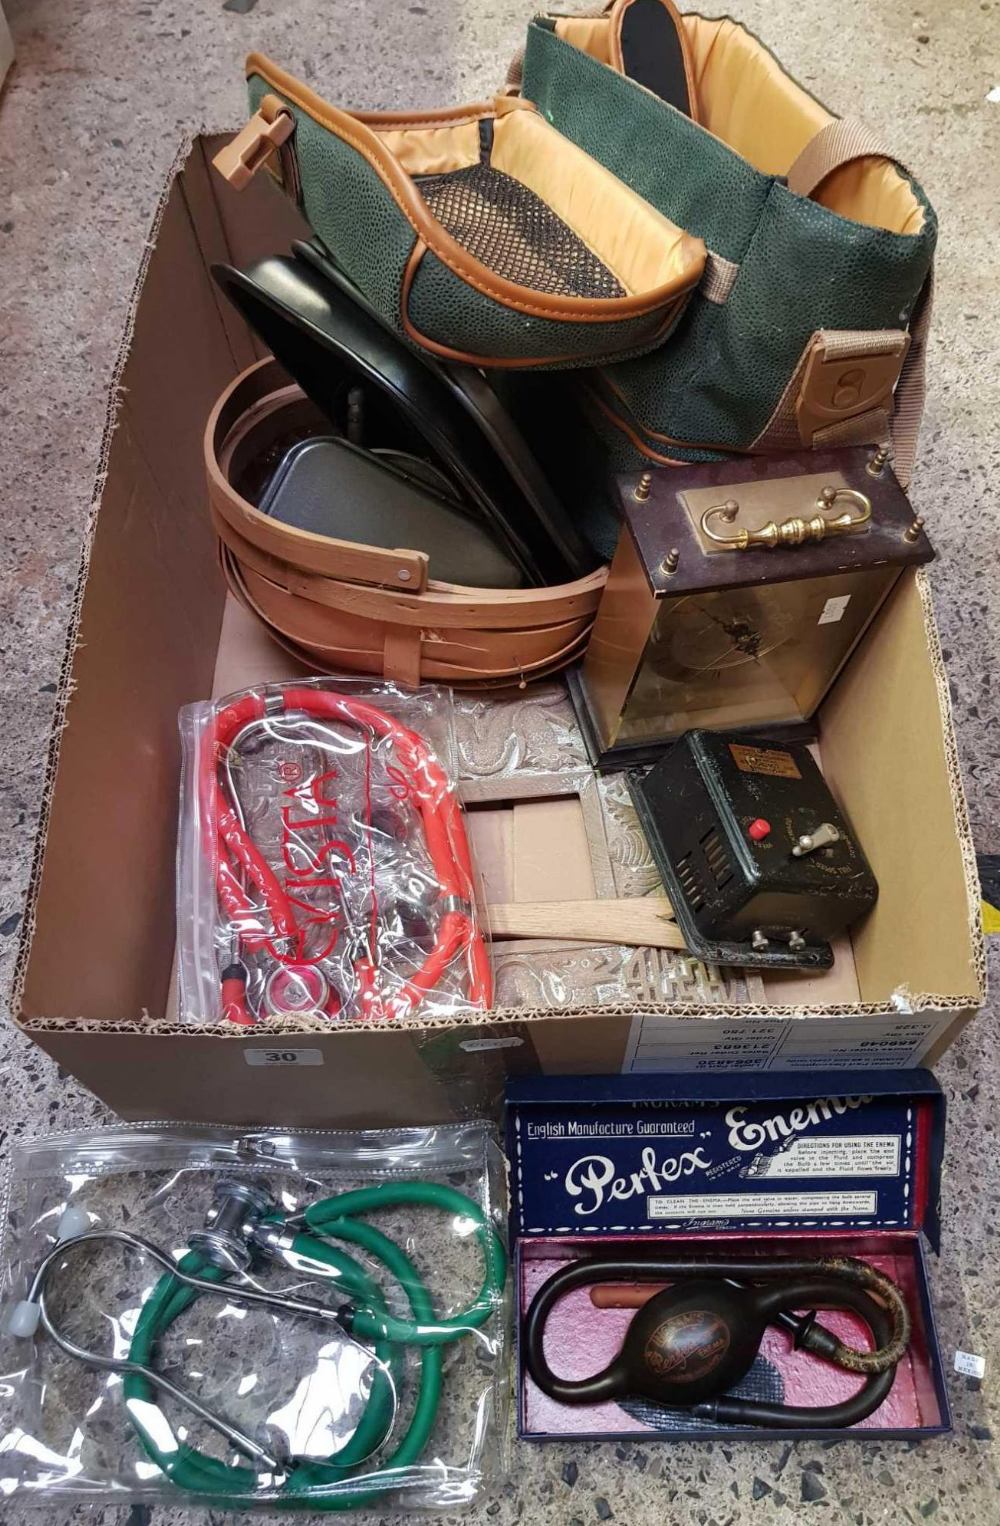 TWO CARTONS OF MIXED CHINA WARE INCLUDING VASES, SMALL CLK, TWO STETHOSCOPES, A SME REEL, CCE BAG, A - Image 2 of 2